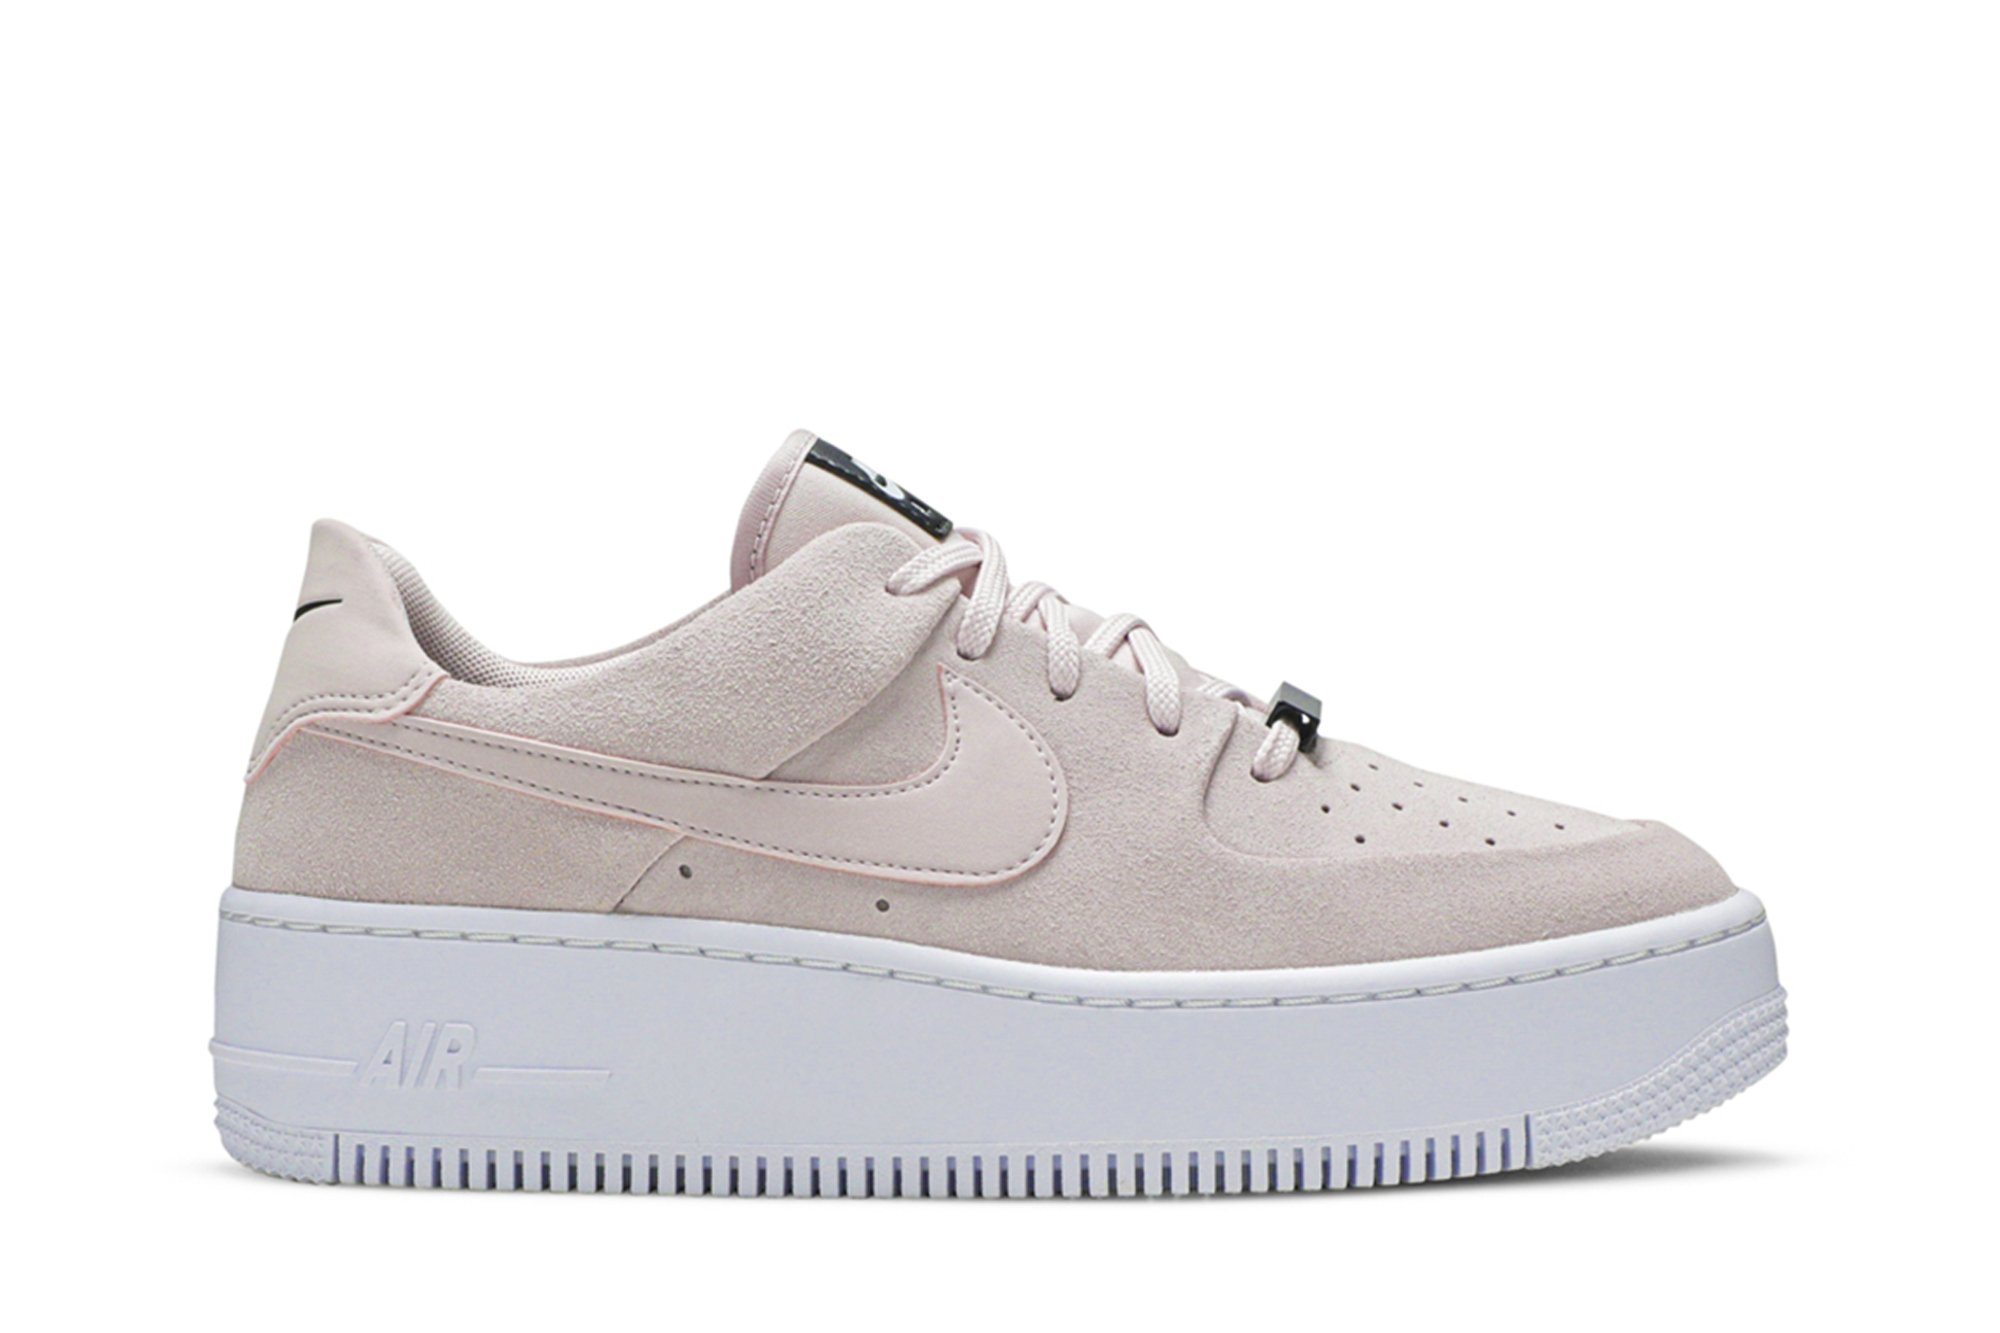 Buy Wmns Air Force 1 Sage Low 'Barely Rose' - AR5339 604 | GOAT